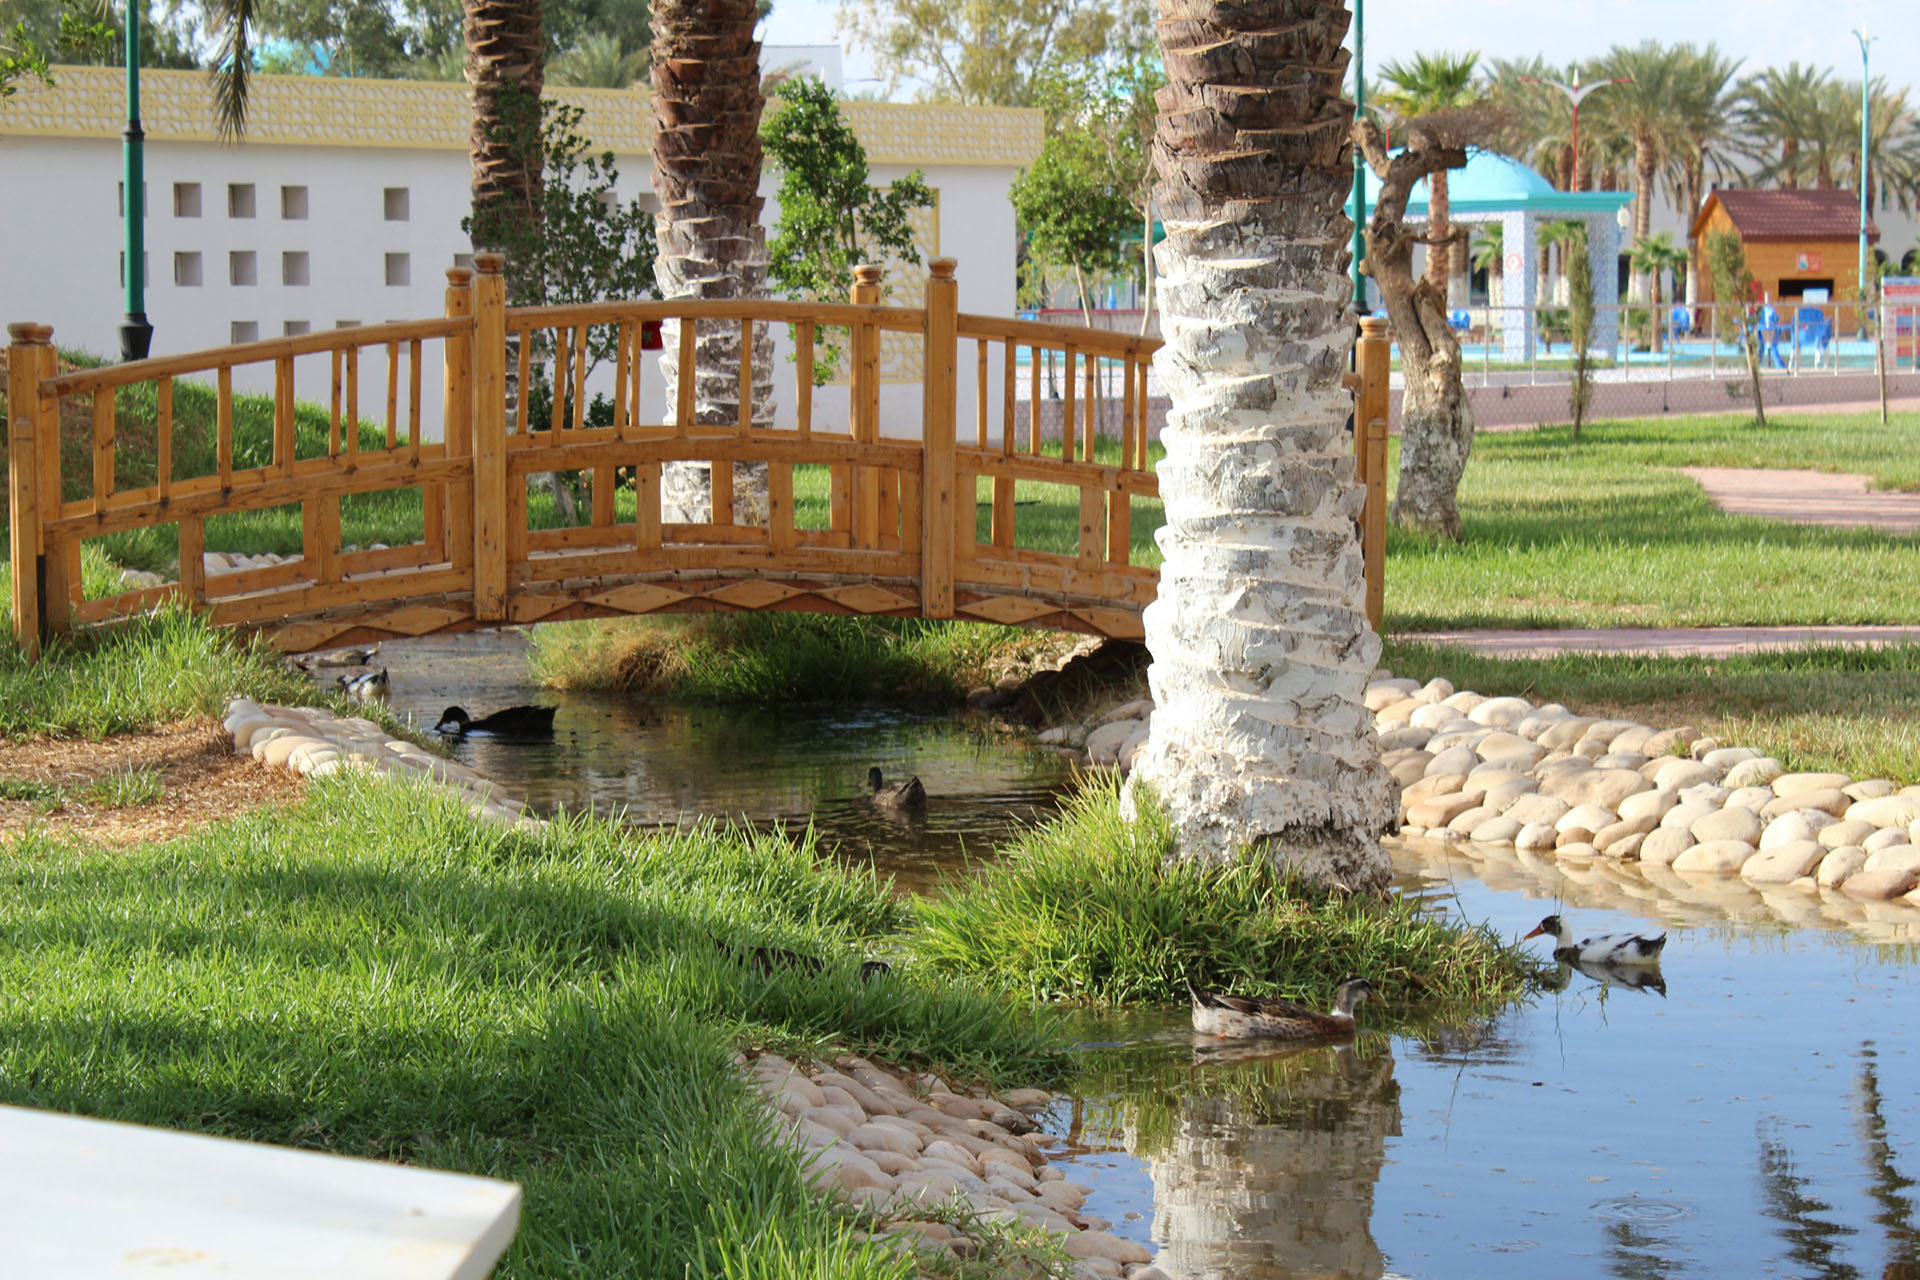 <p>Small bridge. New plantings feature species known to survive in this setting. Artistic landscape features include footbridges, kiosks, a labyrinth, and small Oriental, Aztec, Japanese and Chinese gardens.</p>